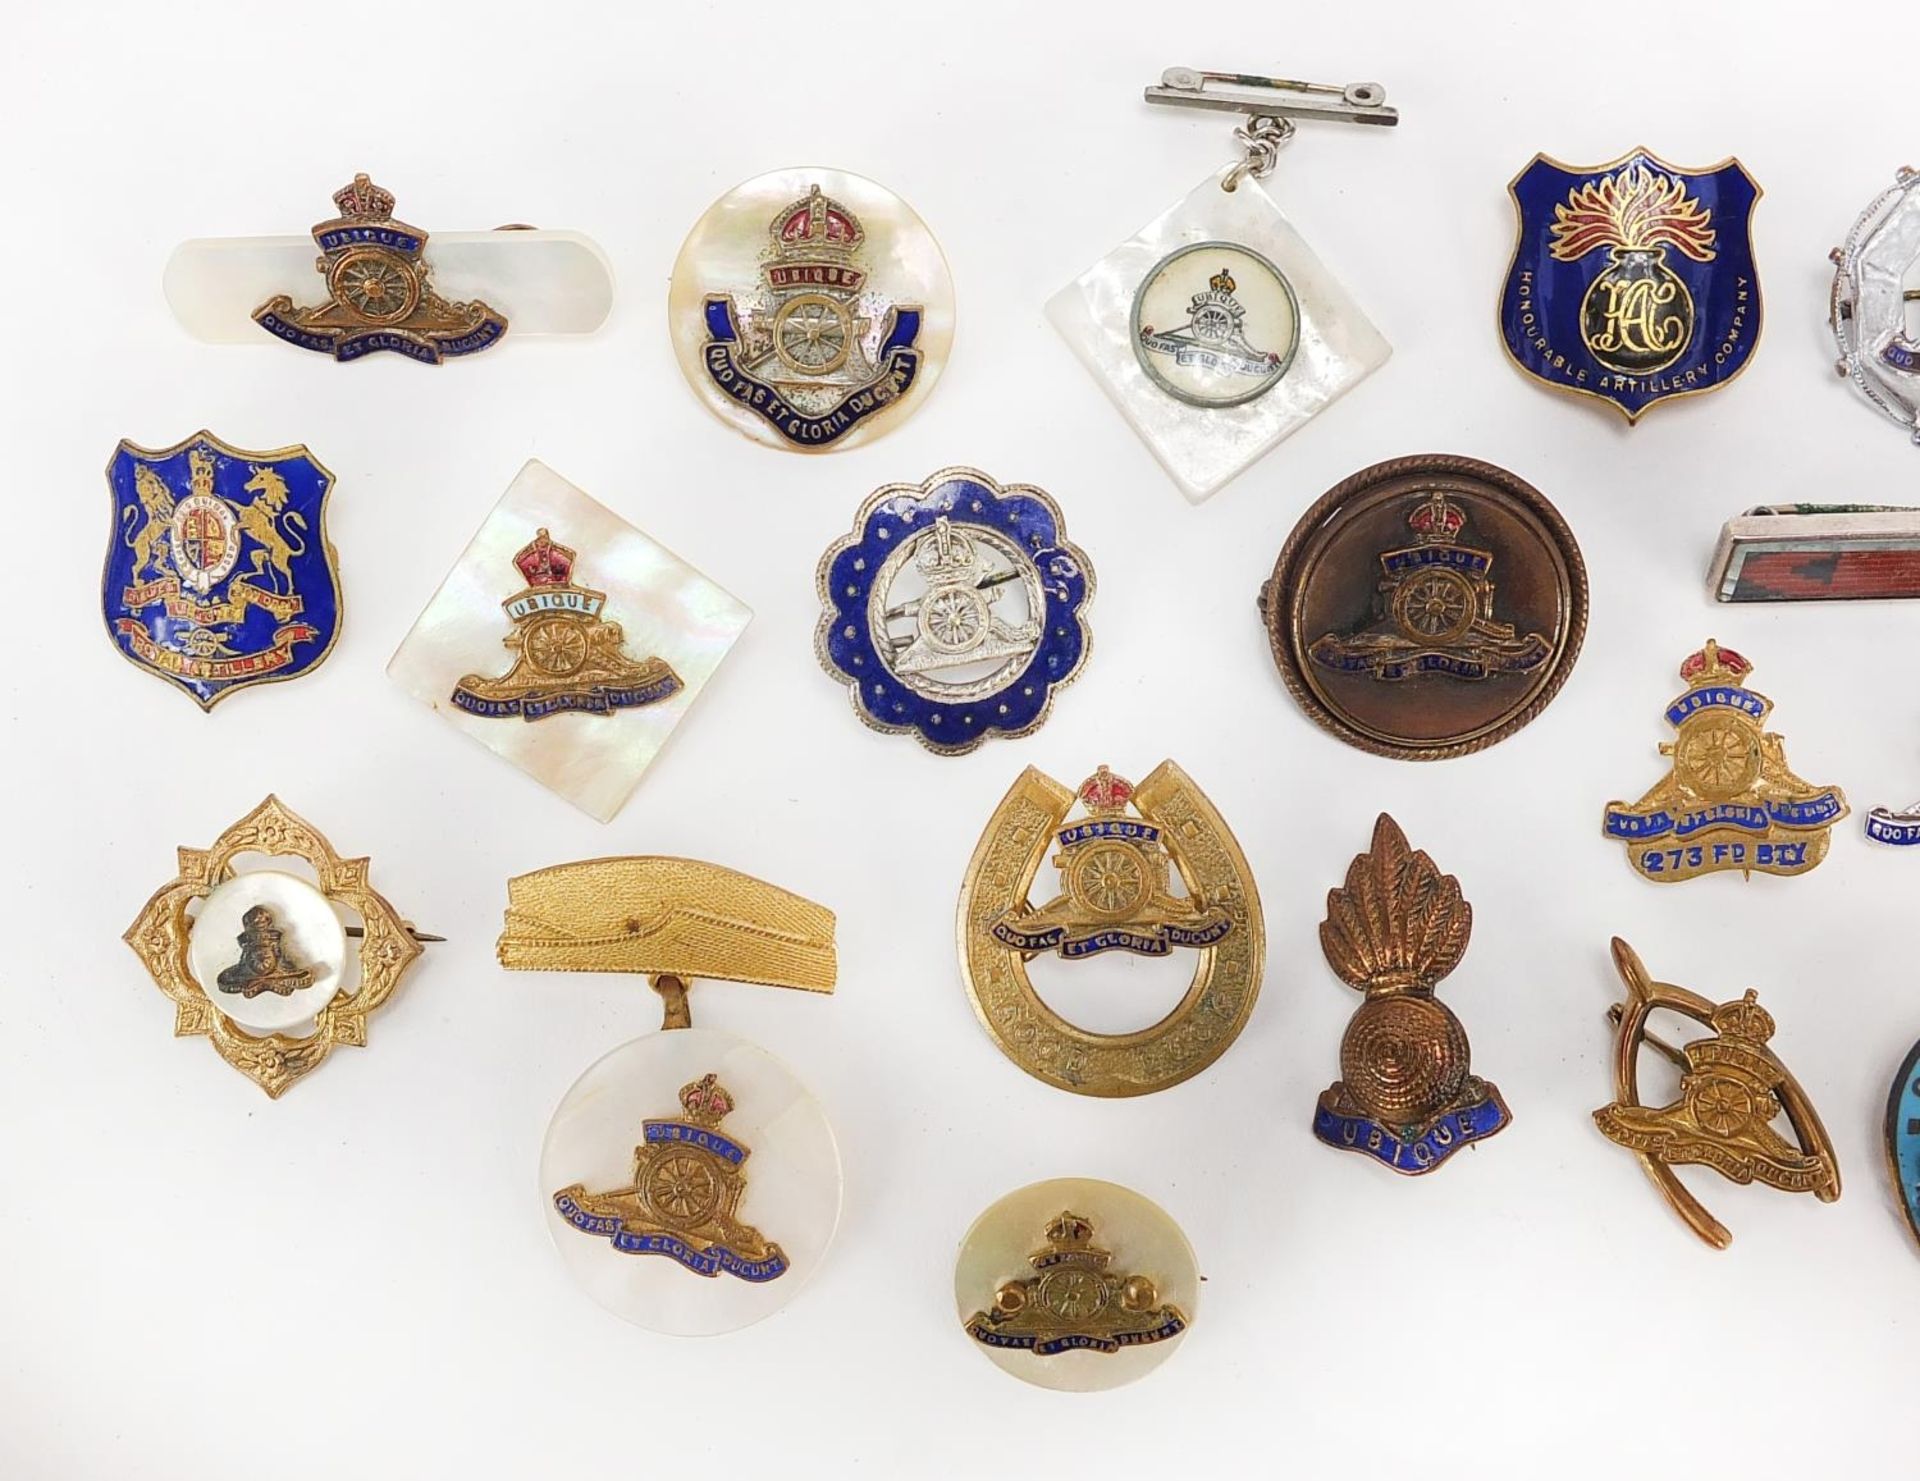 Twenty six British military Royal Artillery badges and bars, including enamel and silver examples - Image 5 of 9